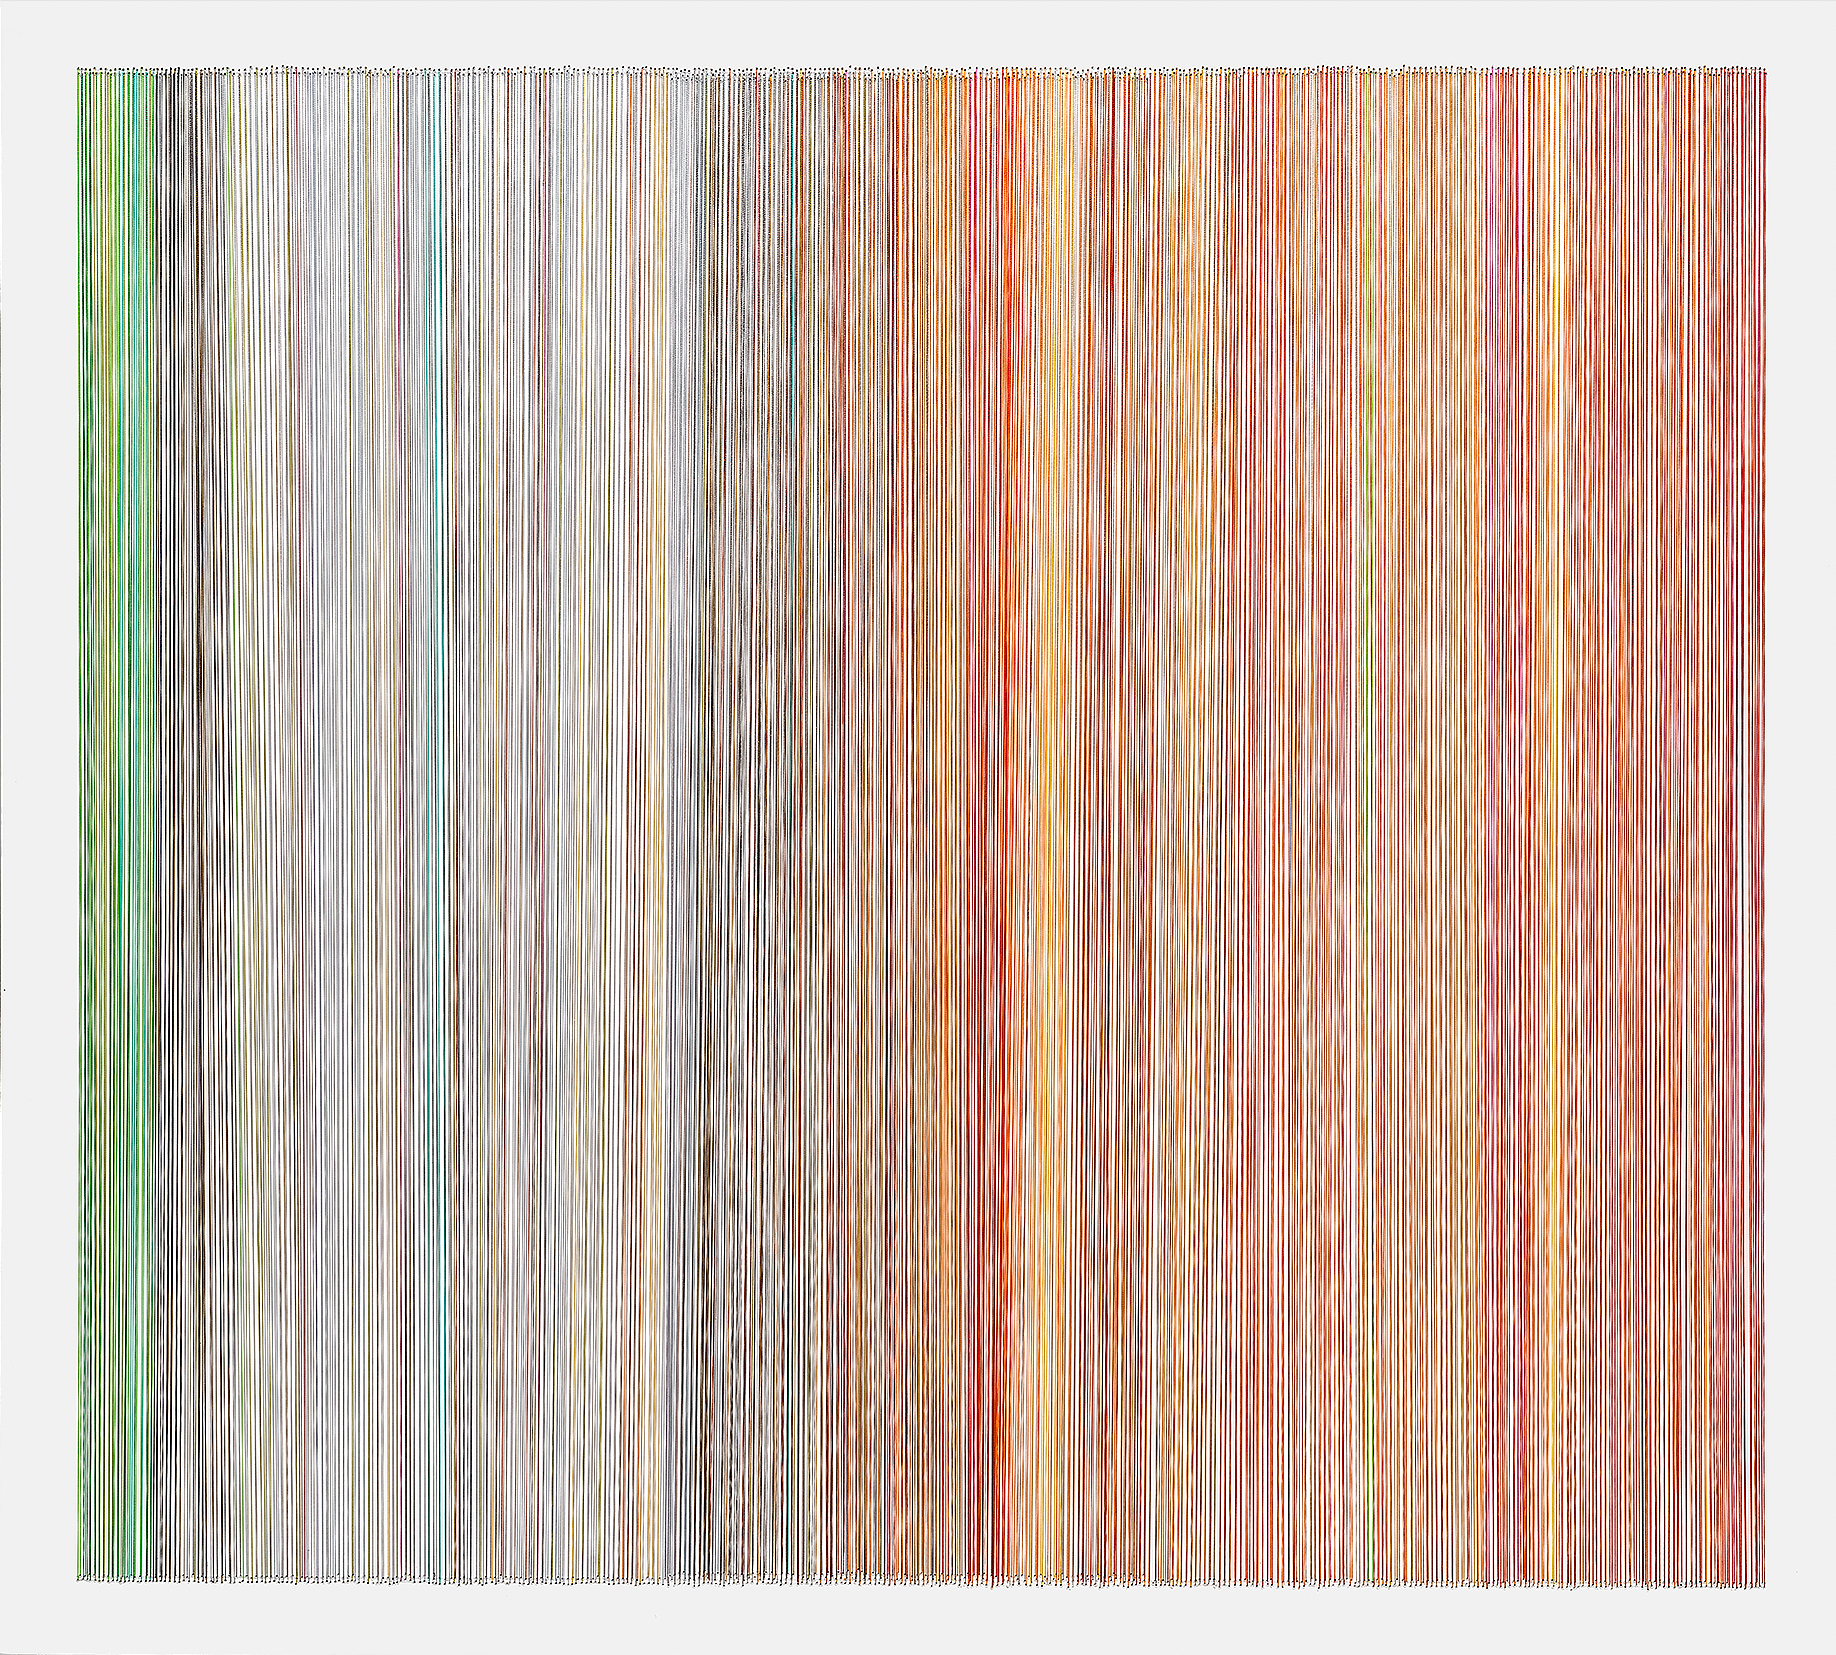    thread drawing 19   2013 rayon thread 28 x 31 inches Private Collection, Mission Hills, Kansas 